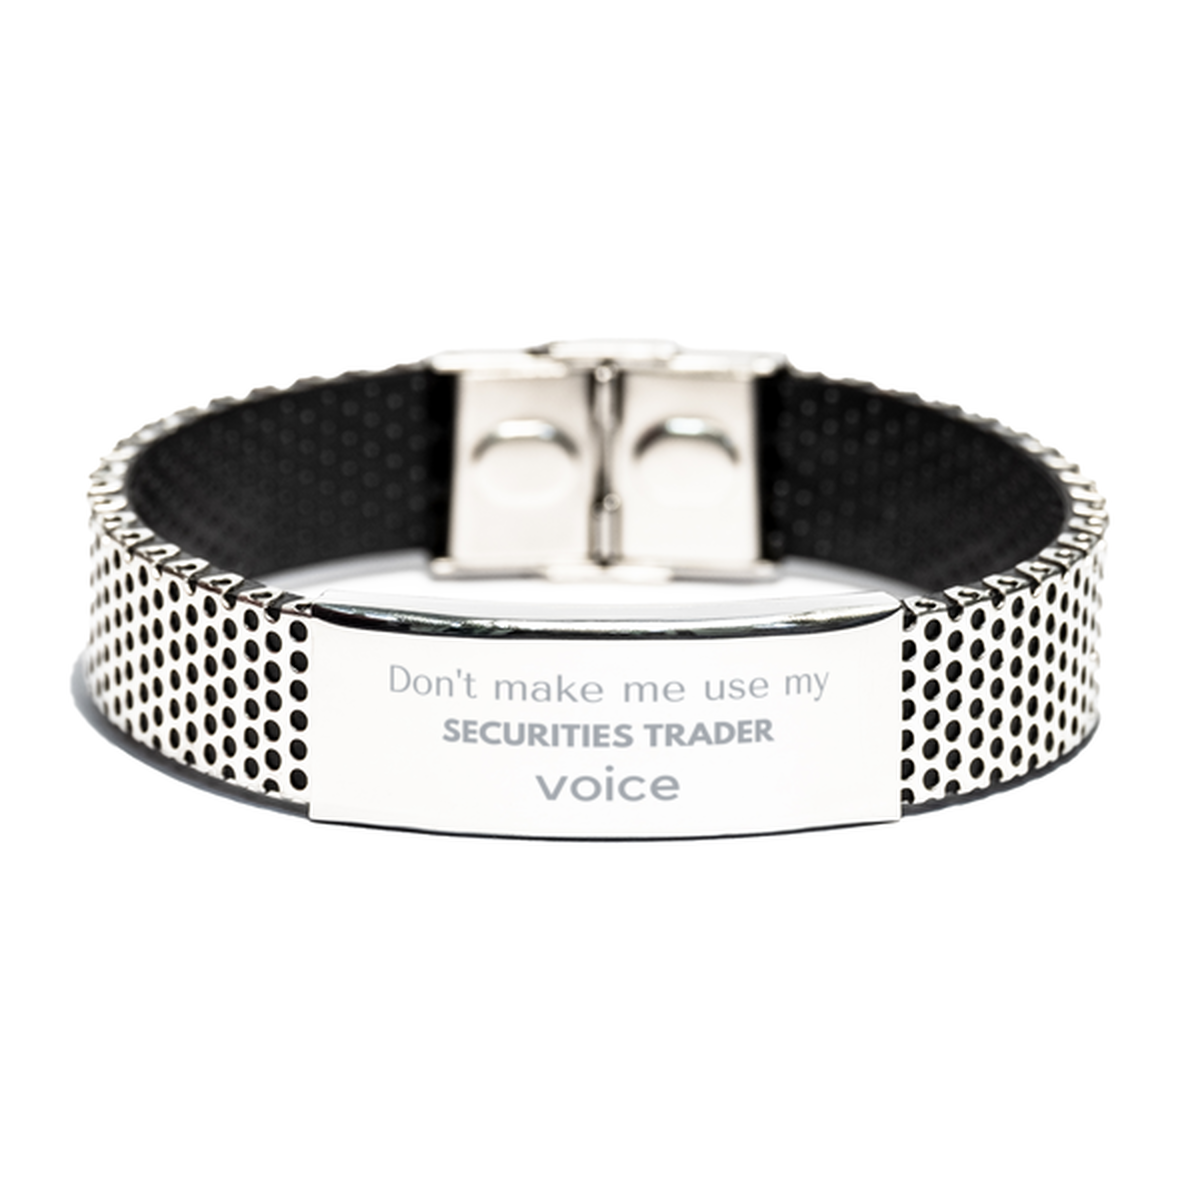 Don't make me use my Securities Trader voice, Sarcasm Securities Trader Gifts, Christmas Securities Trader Stainless Steel Bracelet Birthday Unique Gifts For Securities Trader Coworkers, Men, Women, Colleague, Friends